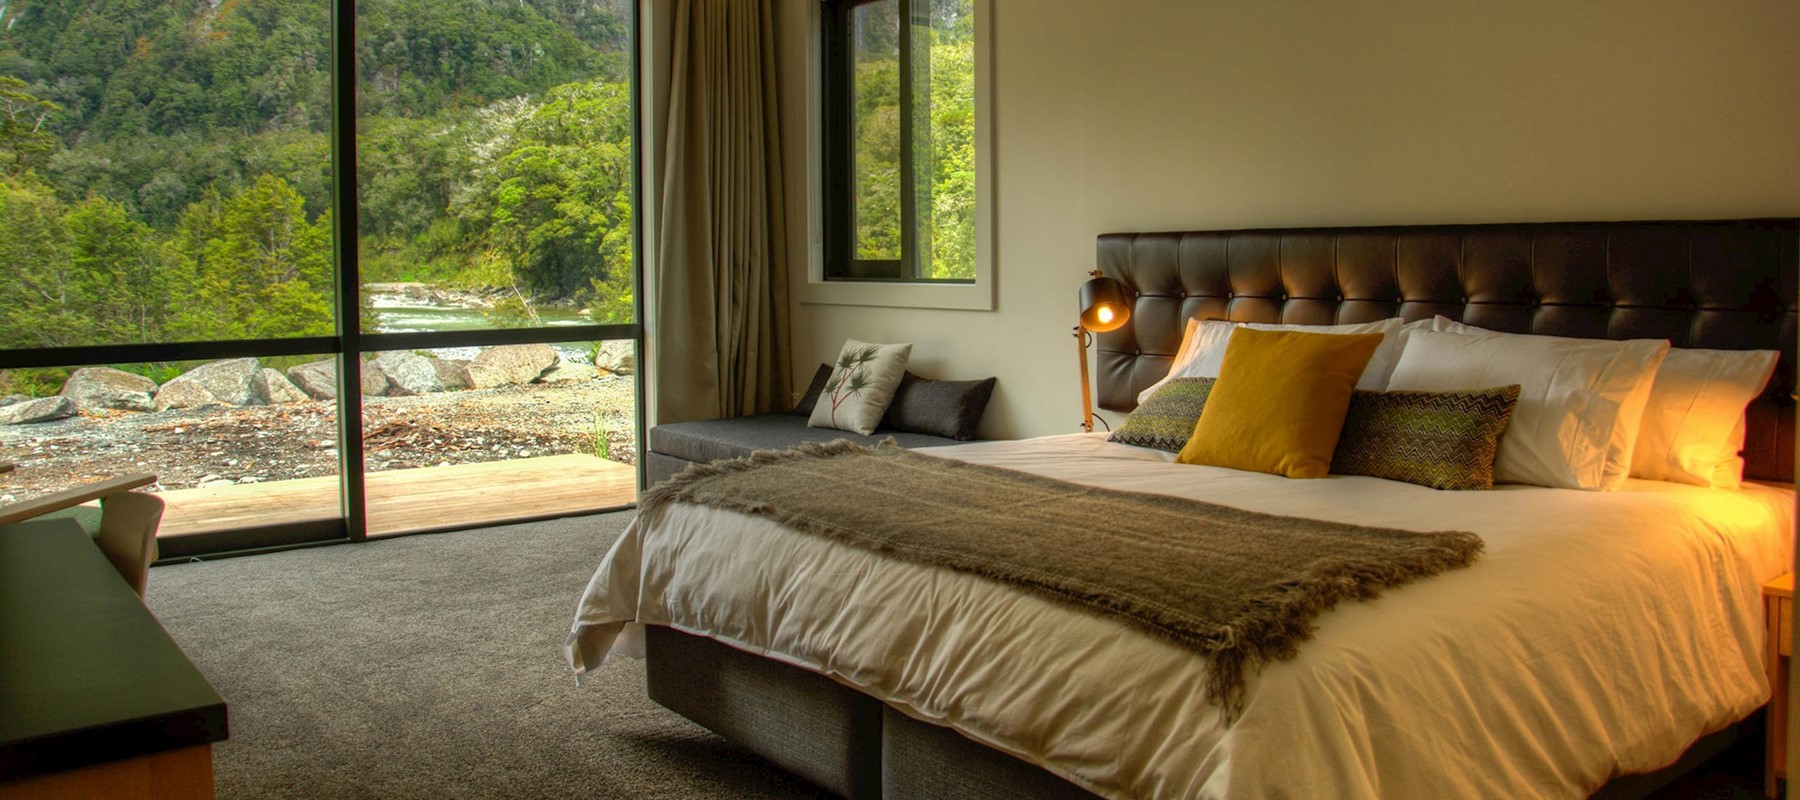 The bedroom in the Riverside Chalet and Milford Sound Lodge, Milford Sound accommodation.